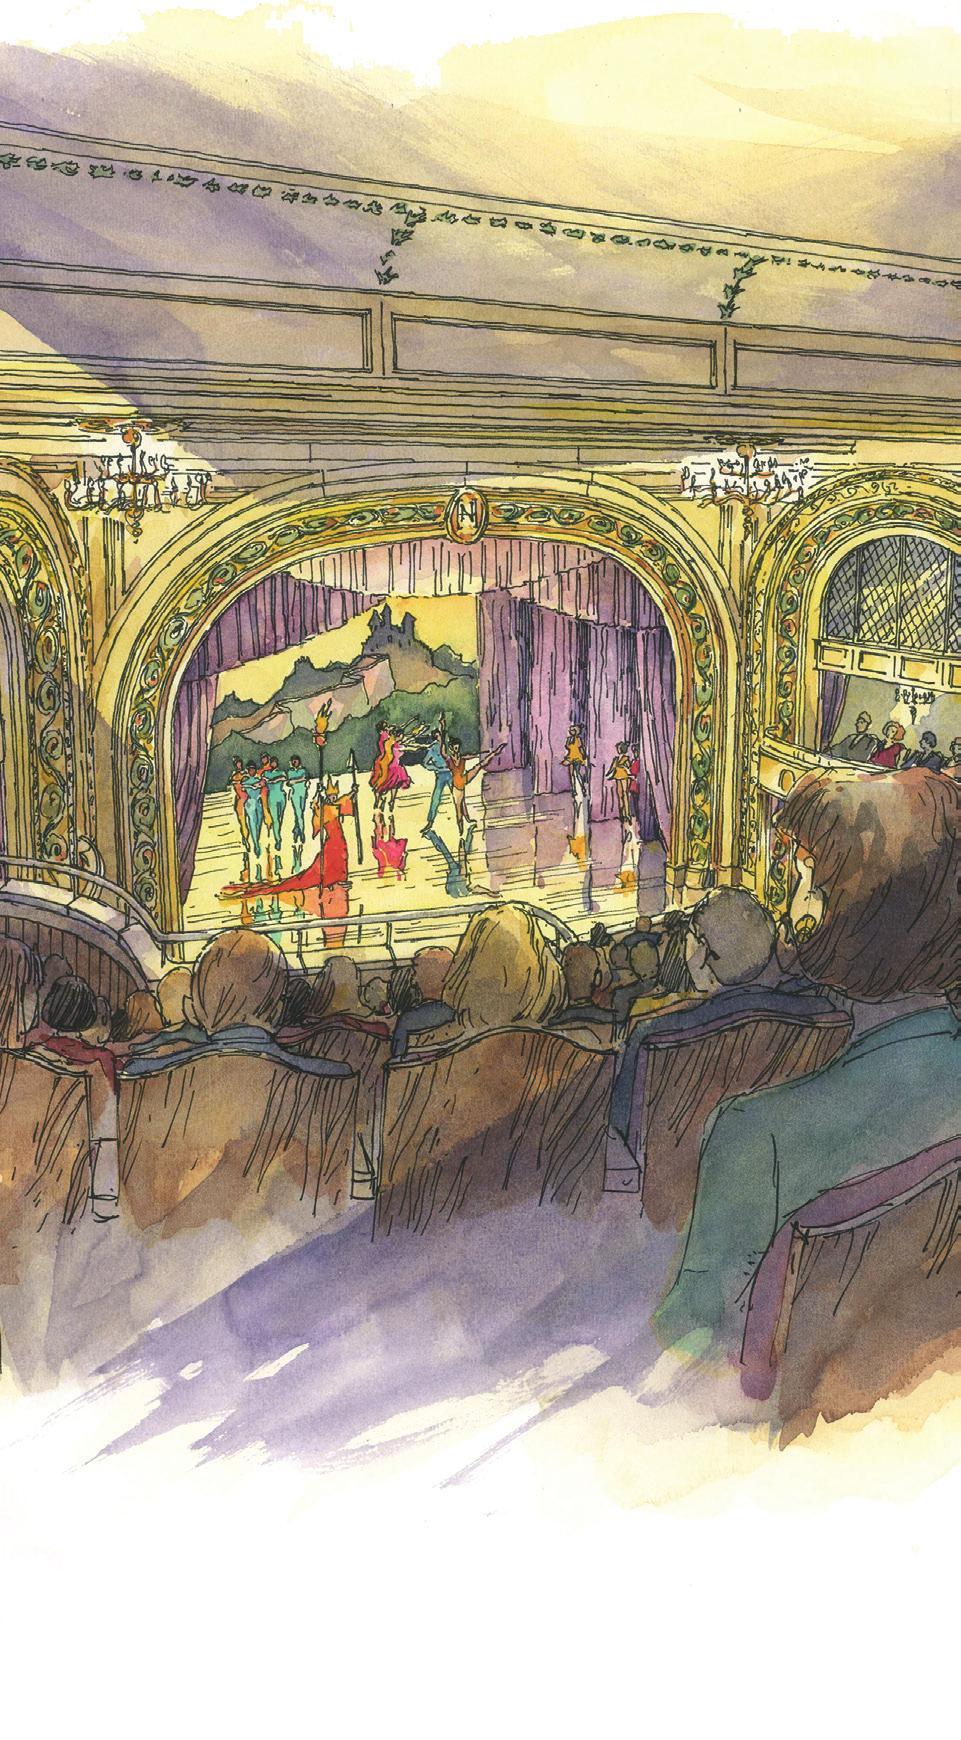 ECONOMIC DRIVER Residents and urban planners have identified the revitalization of the Opera House Theater as one of the best ways to catalyze development of Newport s historic downtown Arts and